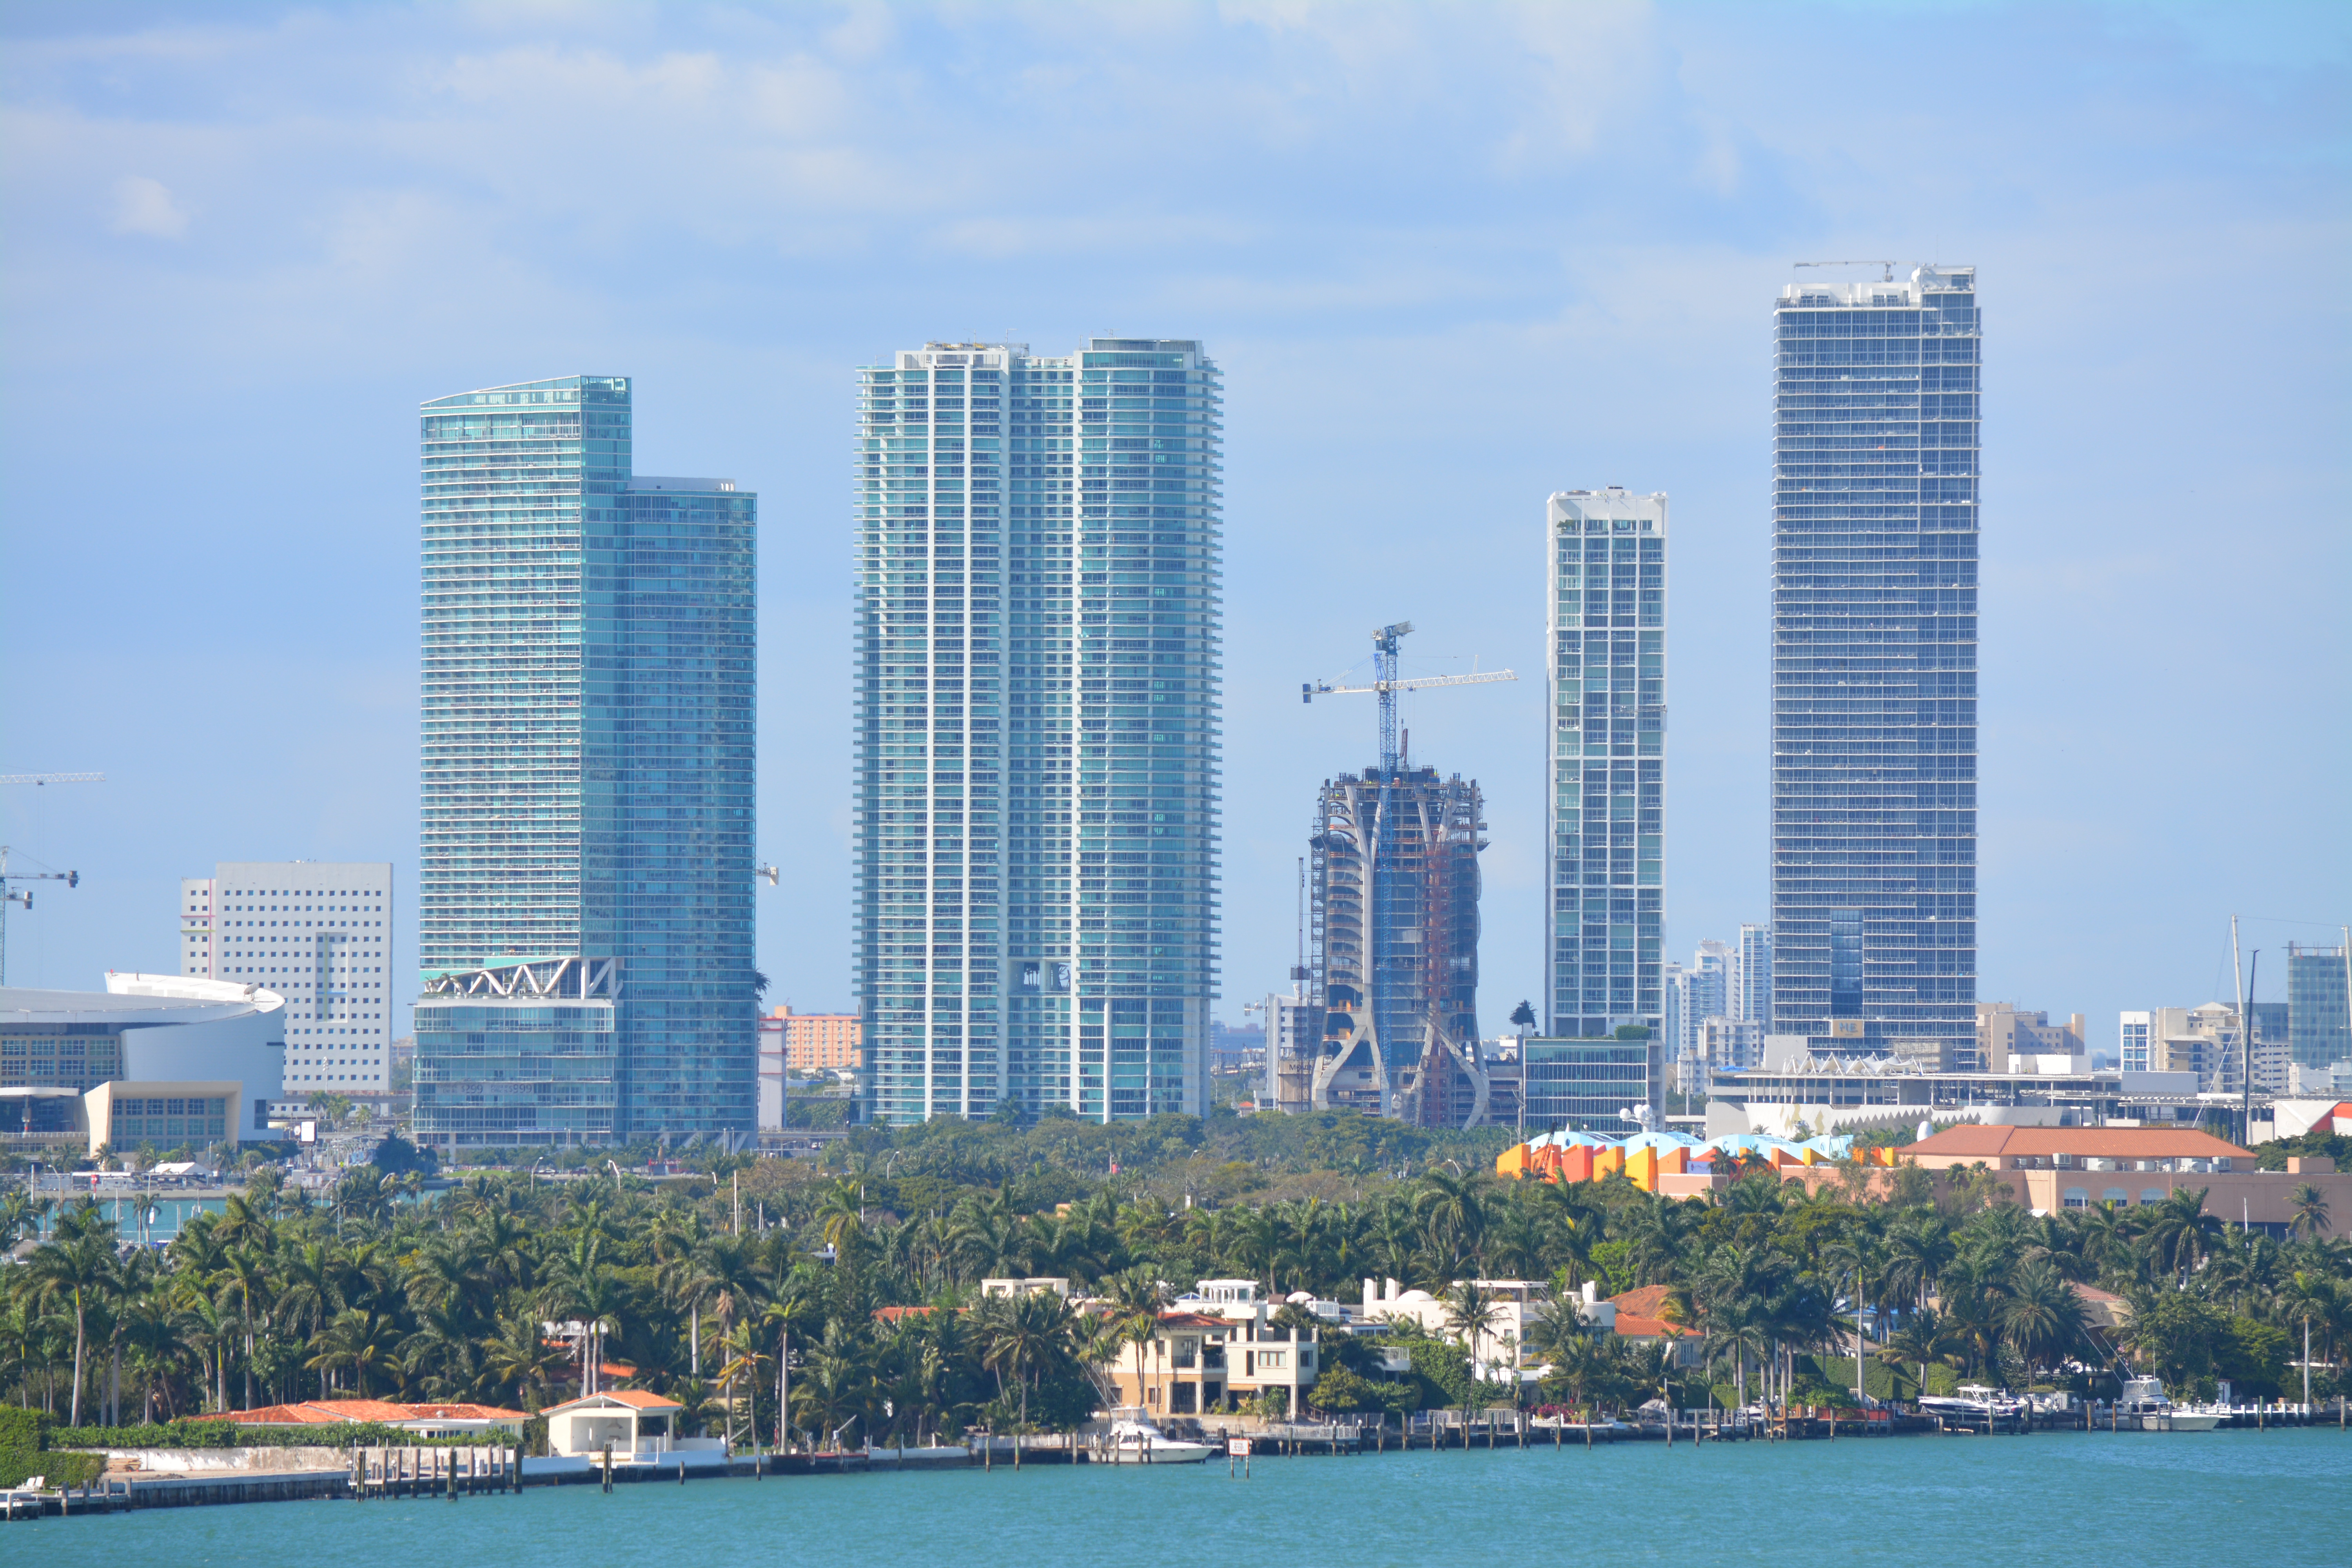 View of downtown Miami with One Thousand Museum rising in the middle